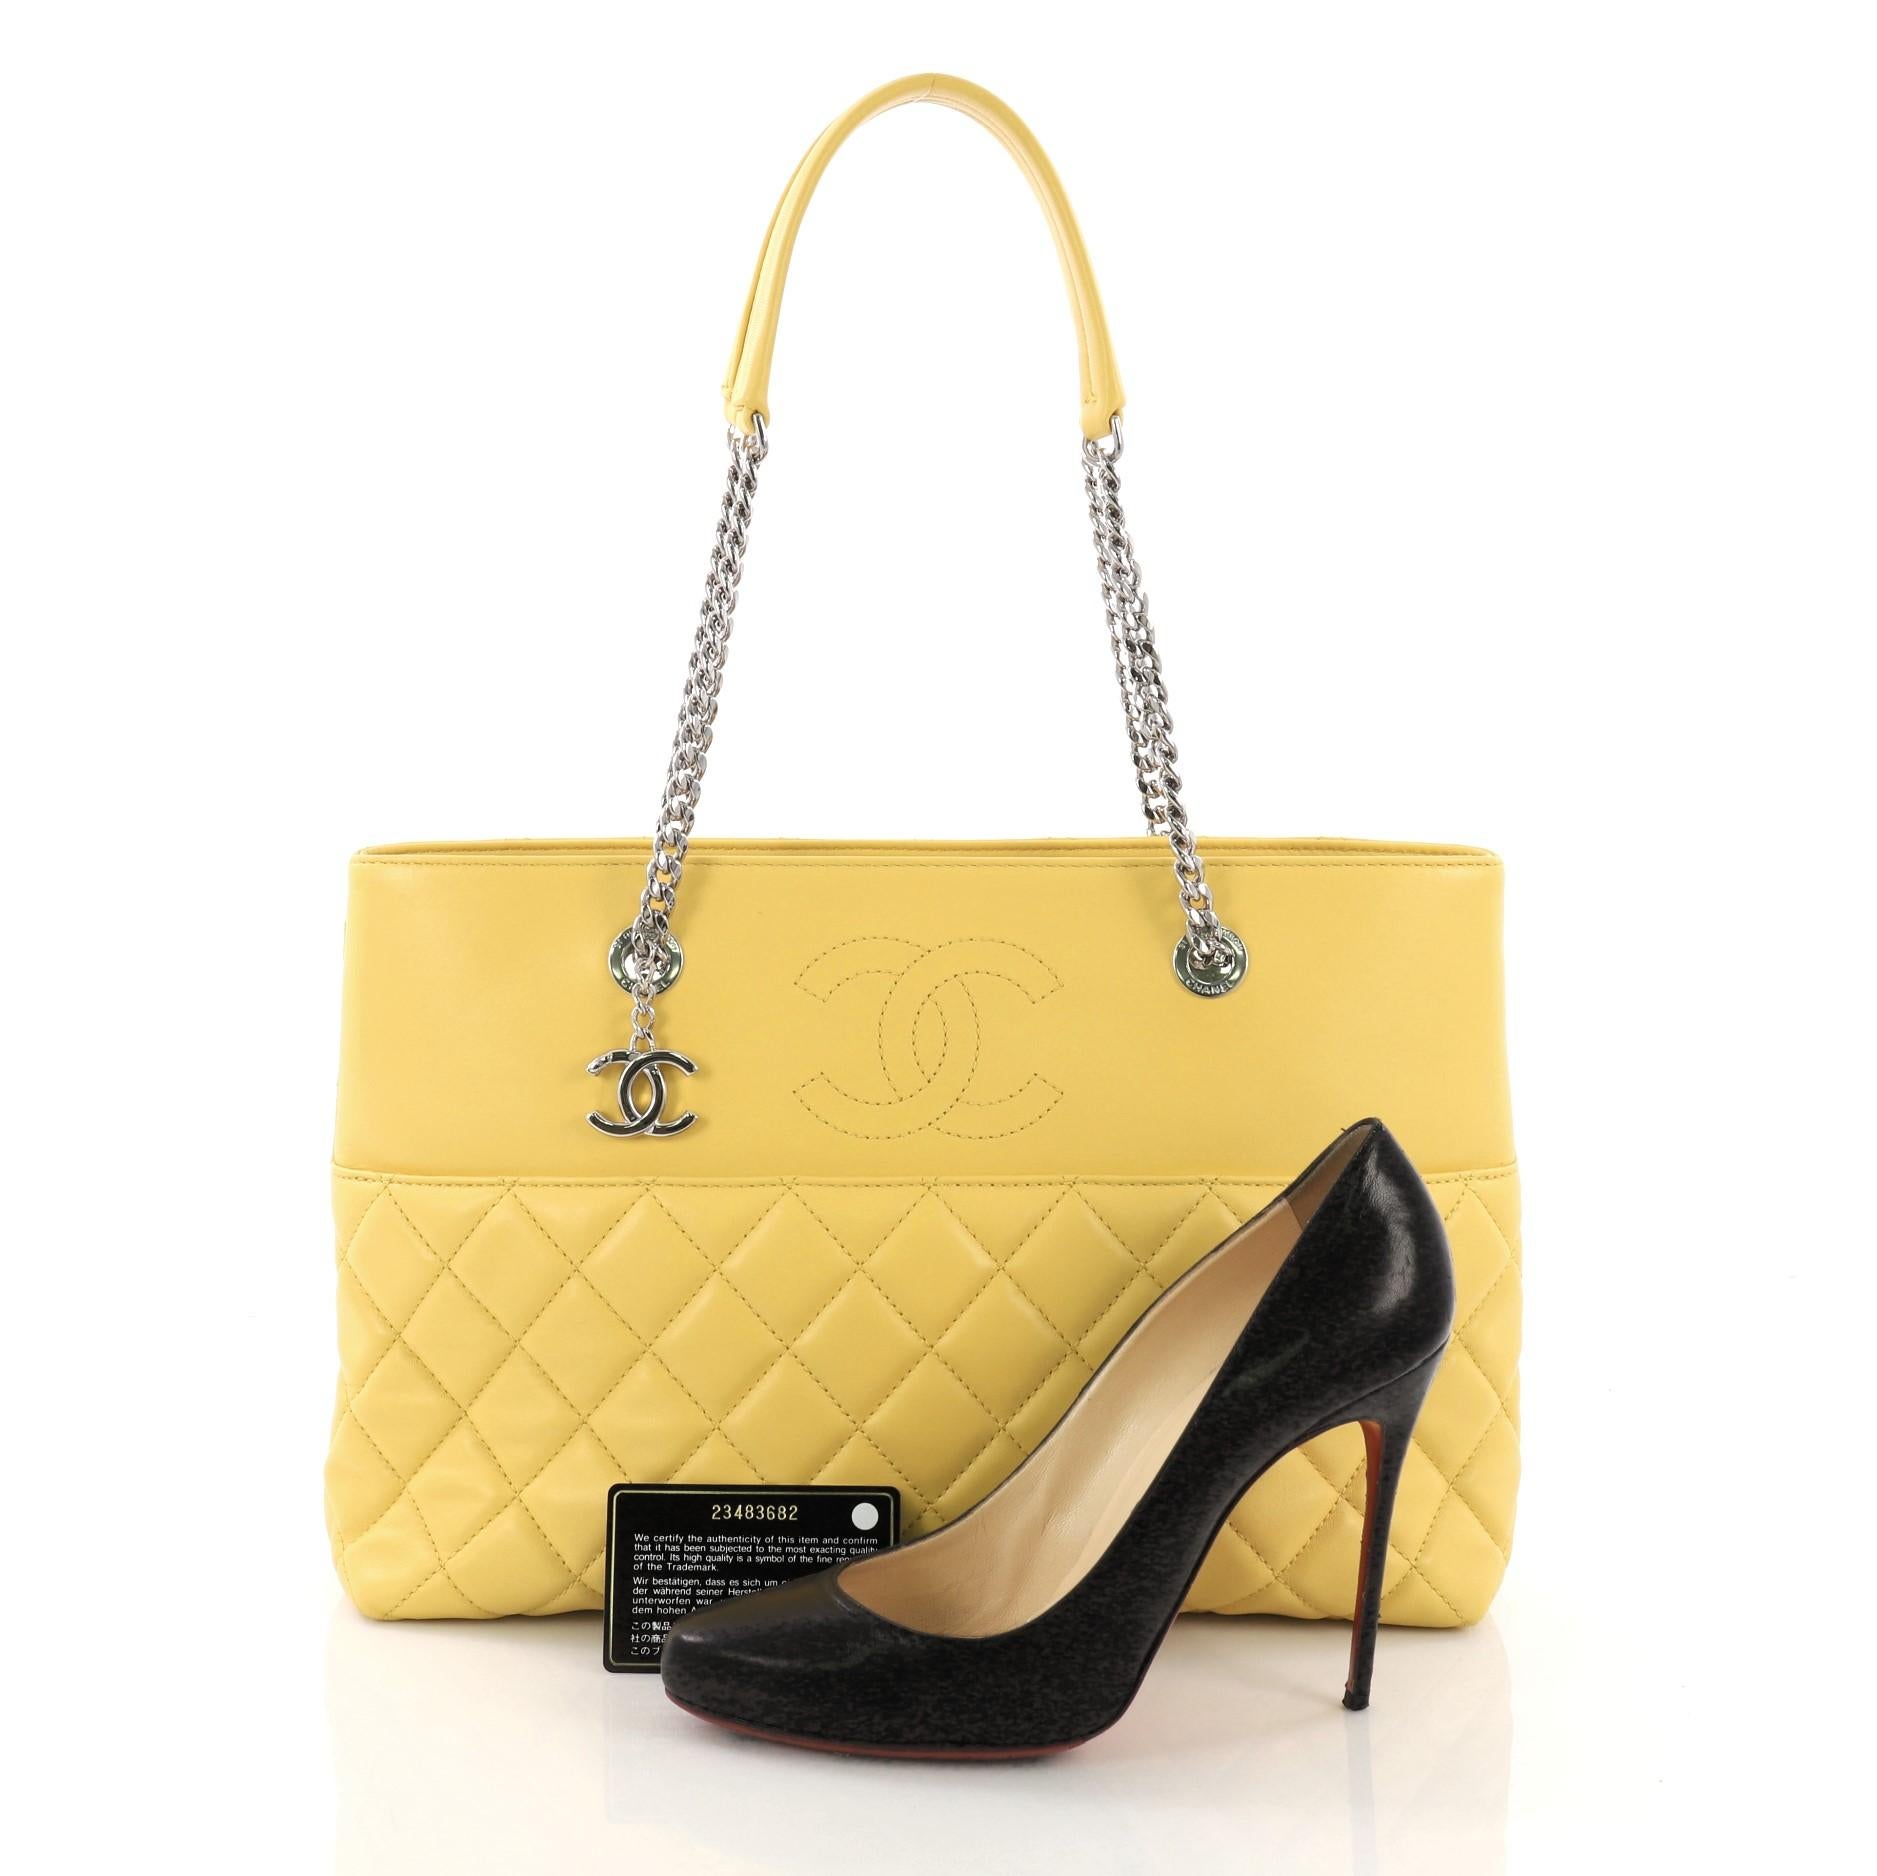 This Chanel Urban Delight Chain Tote Quilted Lambskin Large, crafted from yellow quilted lambskin, features dual chain link straps with leather pads, exterior slip pocket, and silver-tone hardware. Its magnetic snap button closure opens to a yellow